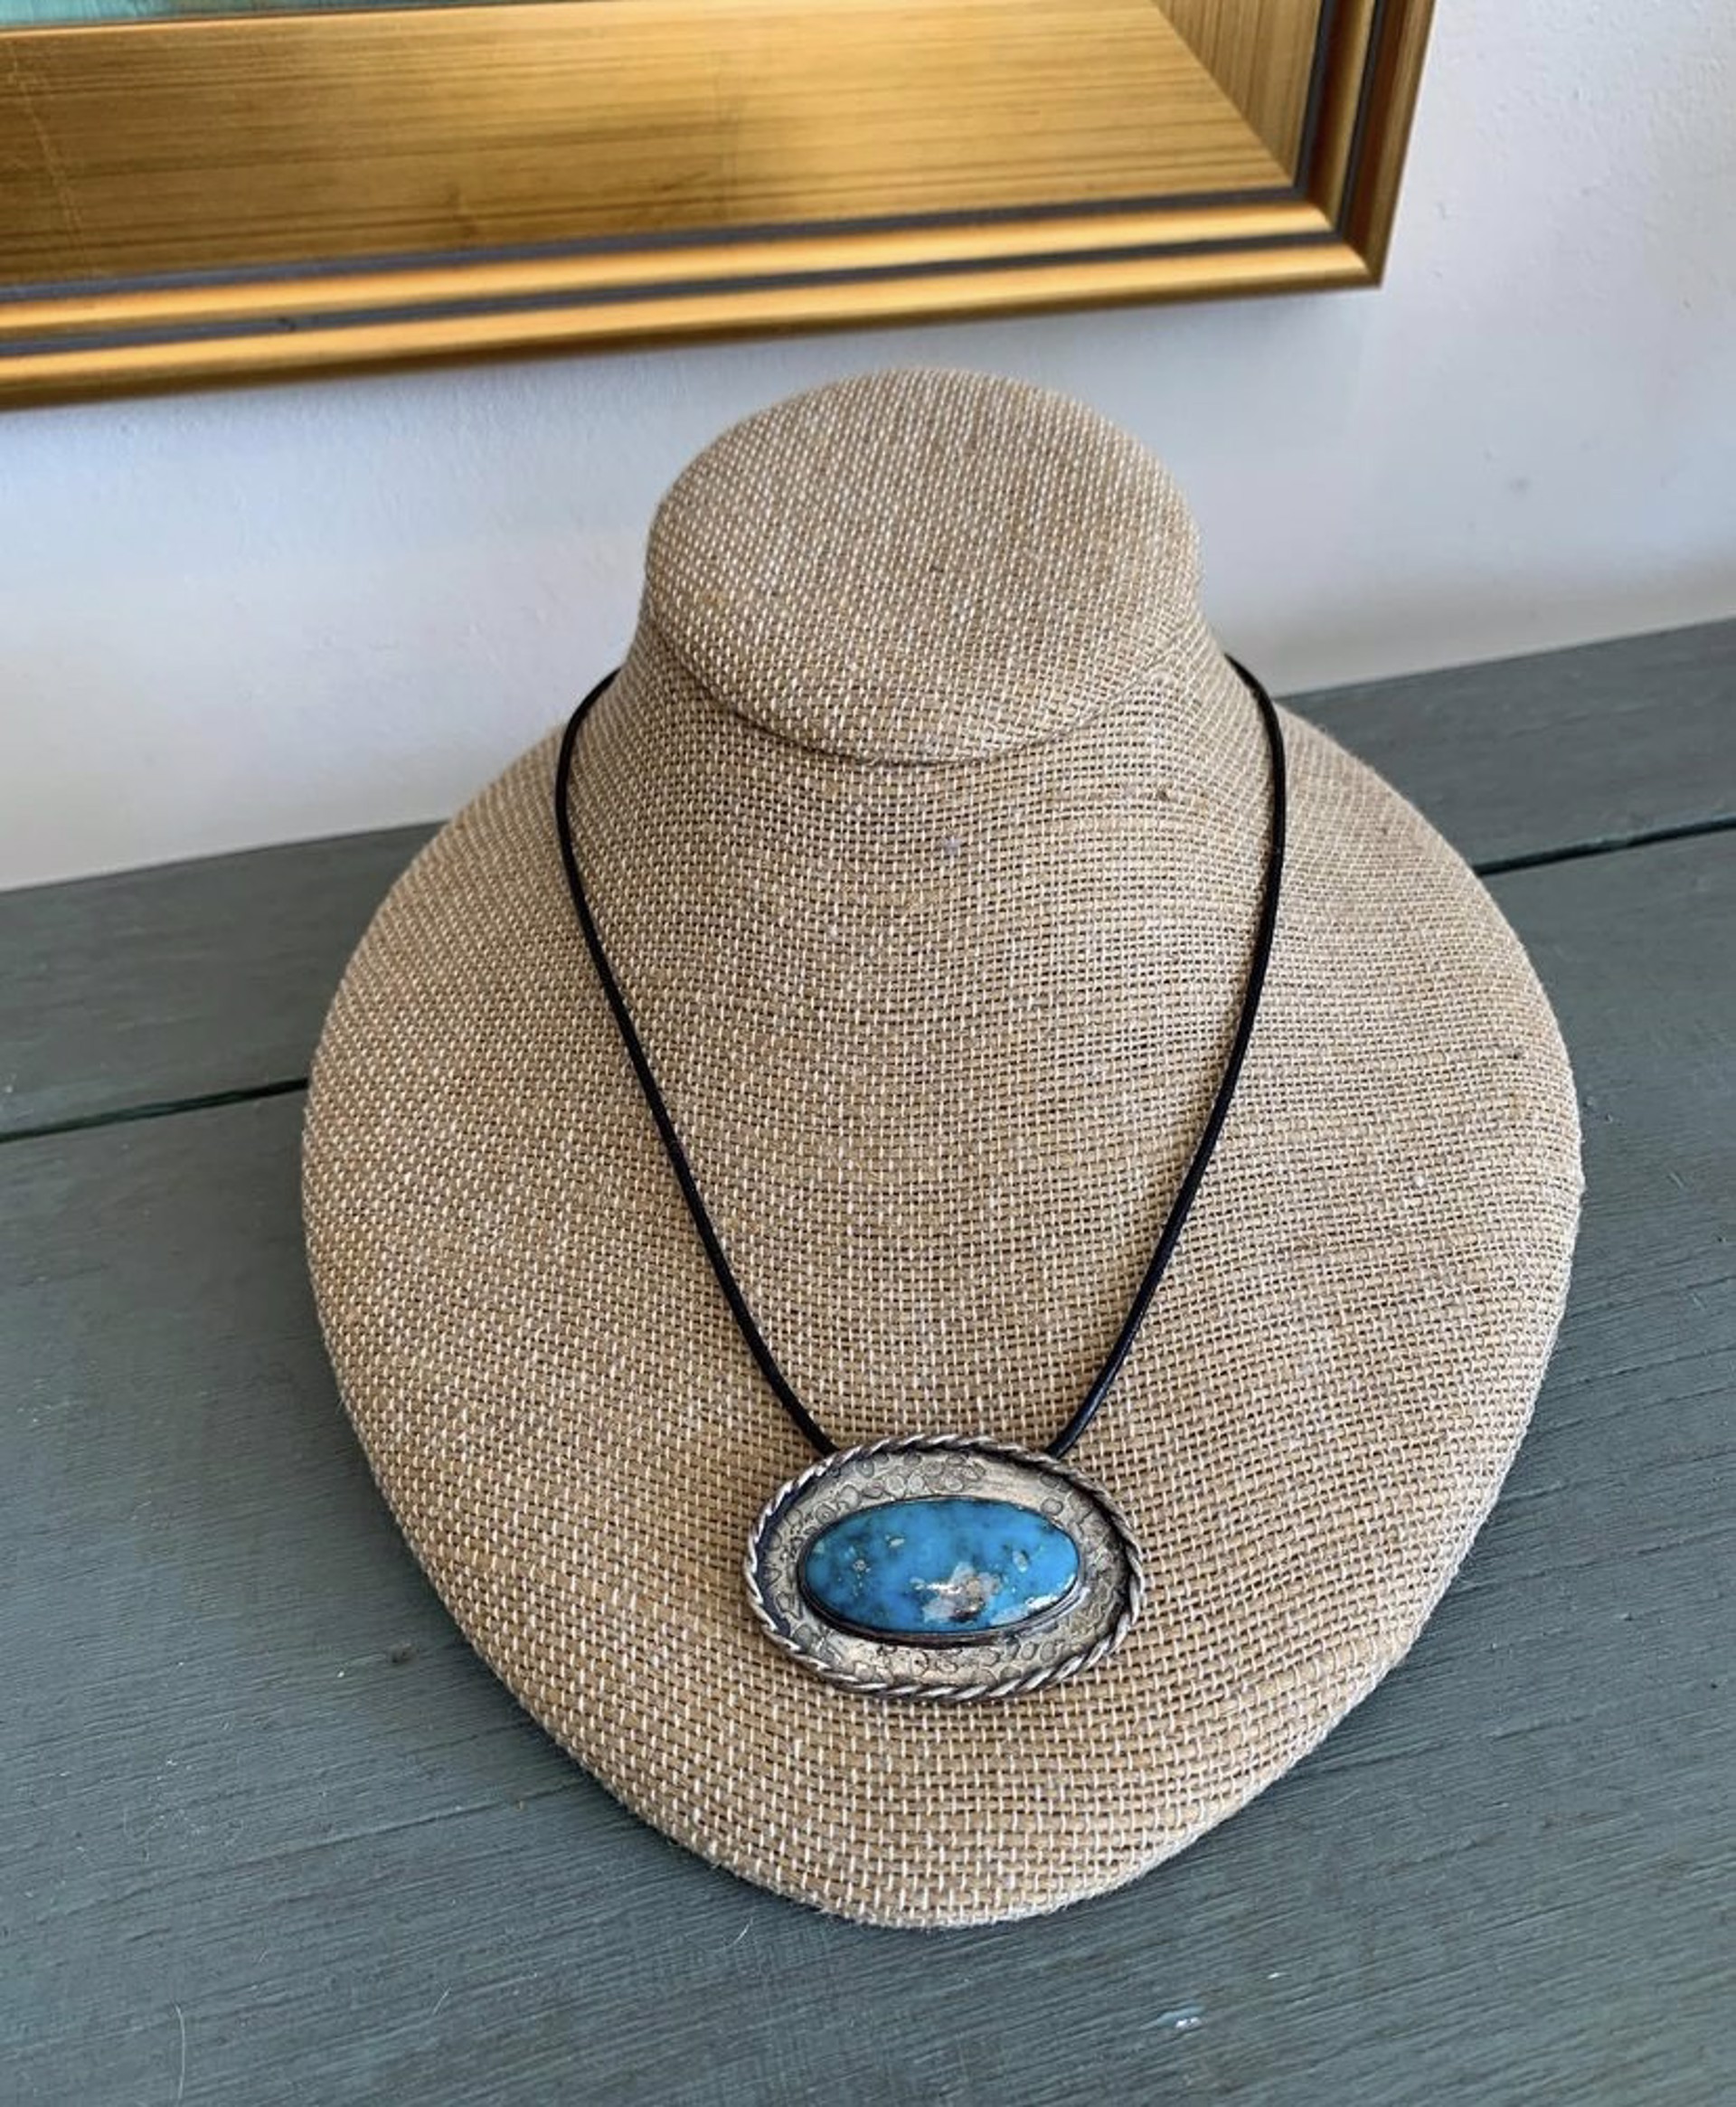 Necklace by Anne Bivens